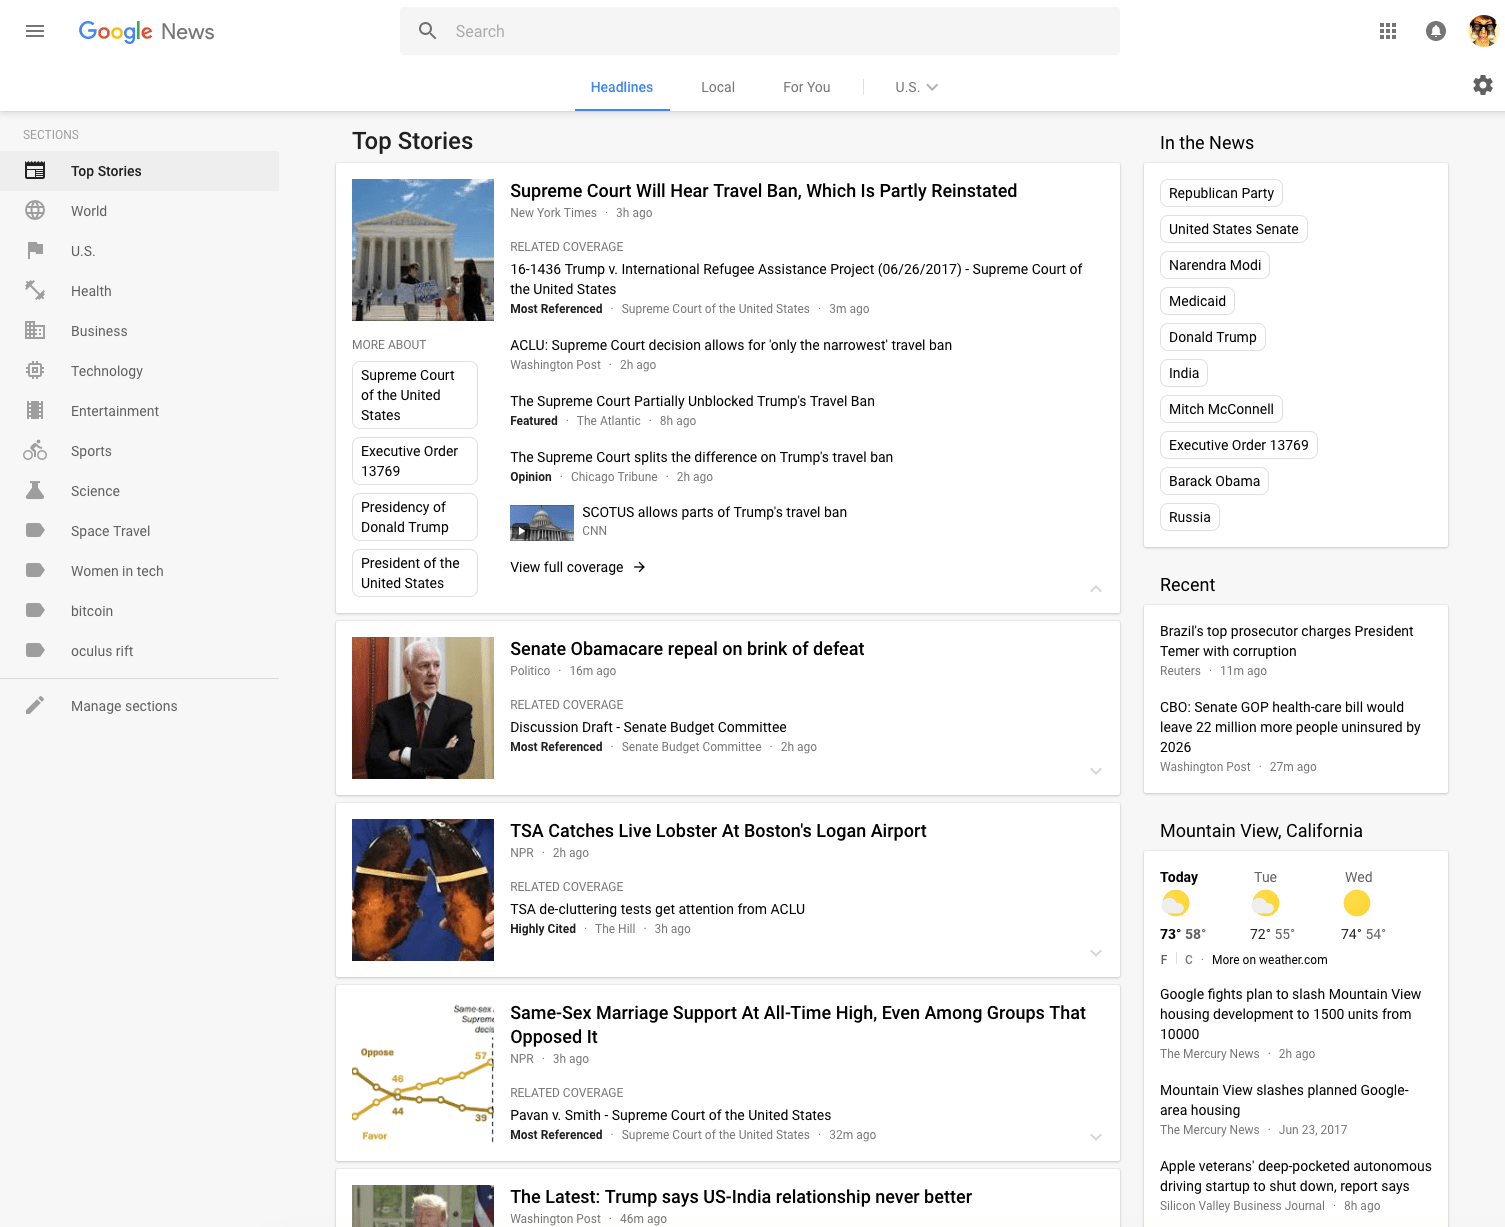 Google News Redesigned With an Emphasis on Fact Checking